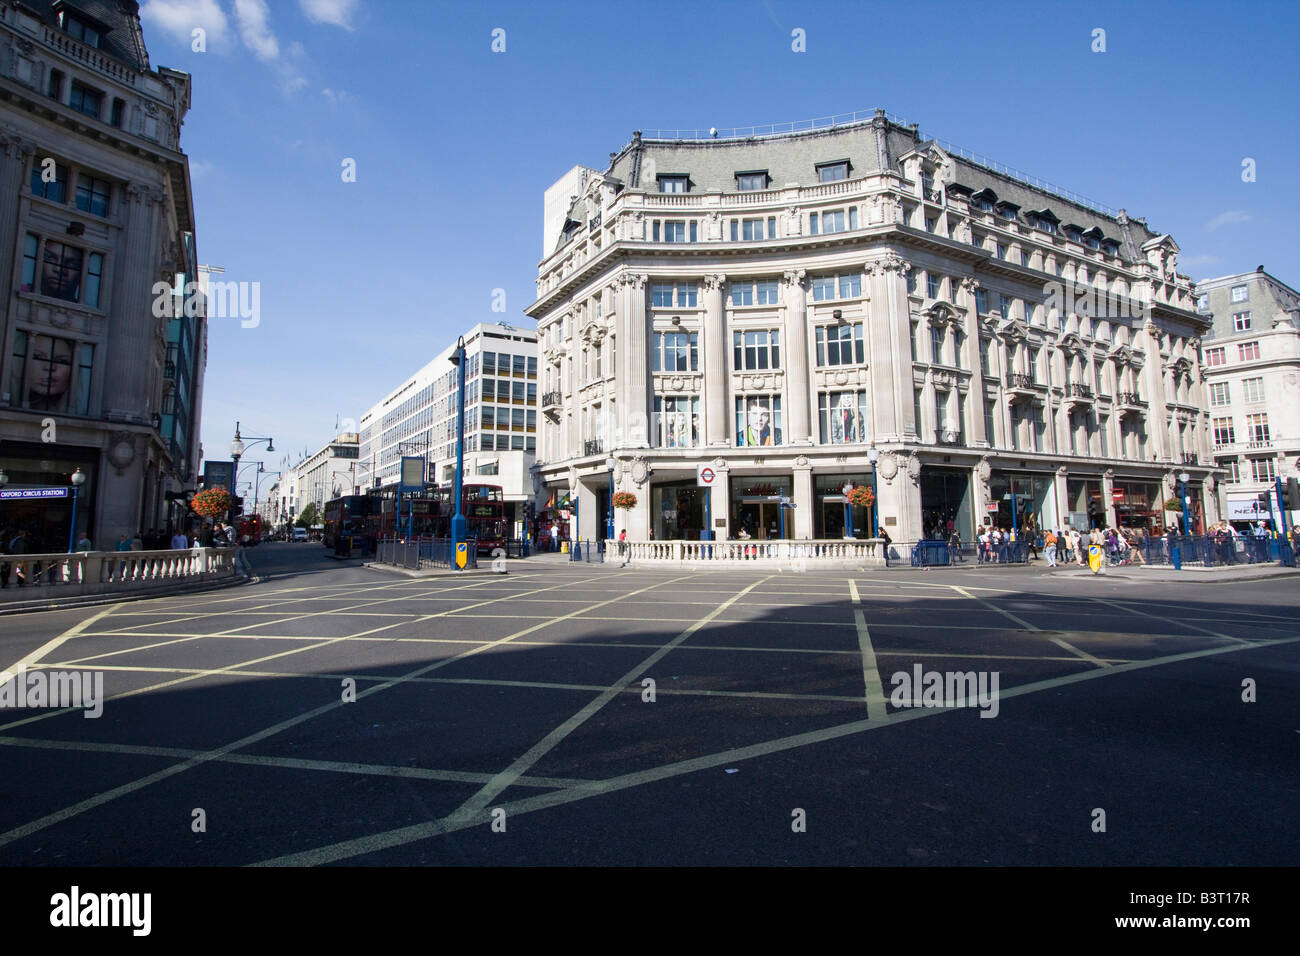 oxford circus regent street oxford street junction with no traffic london west end england uk gb Stock Photo